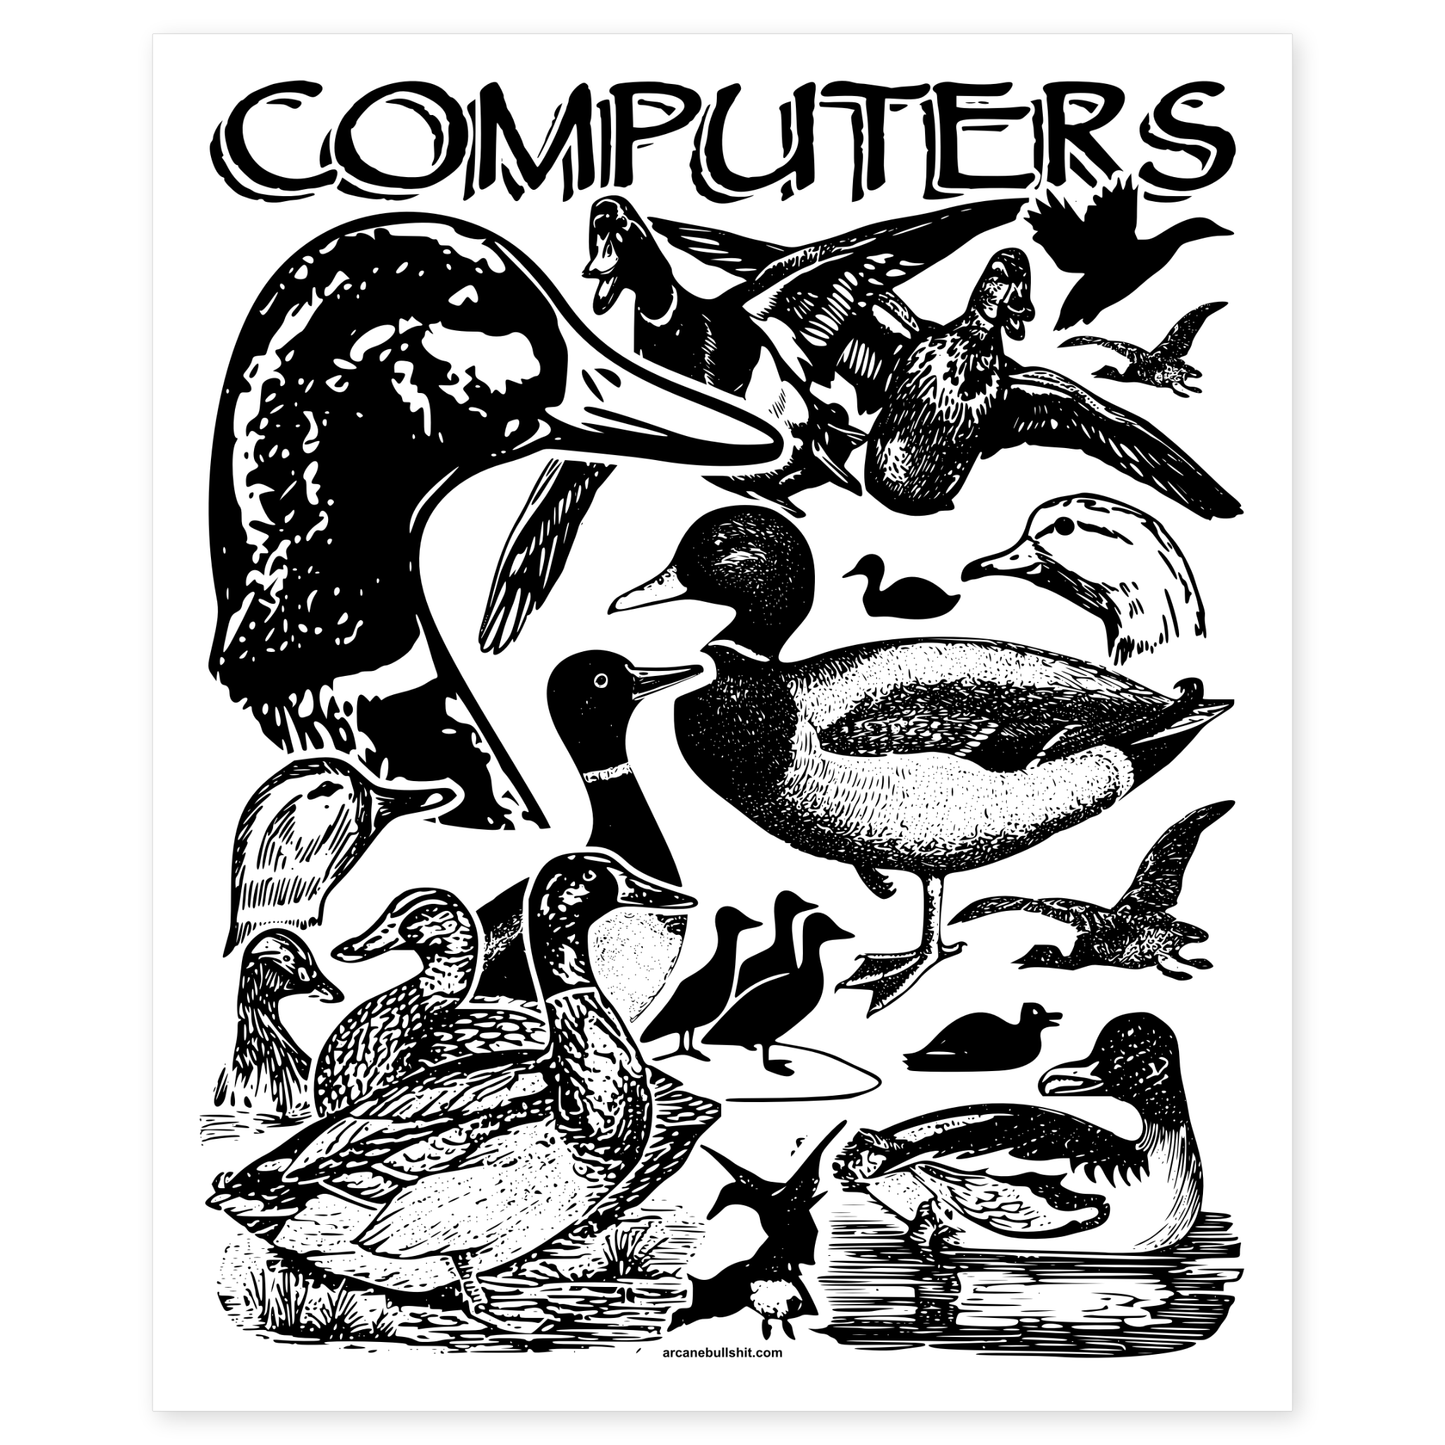 "Computers" Poster